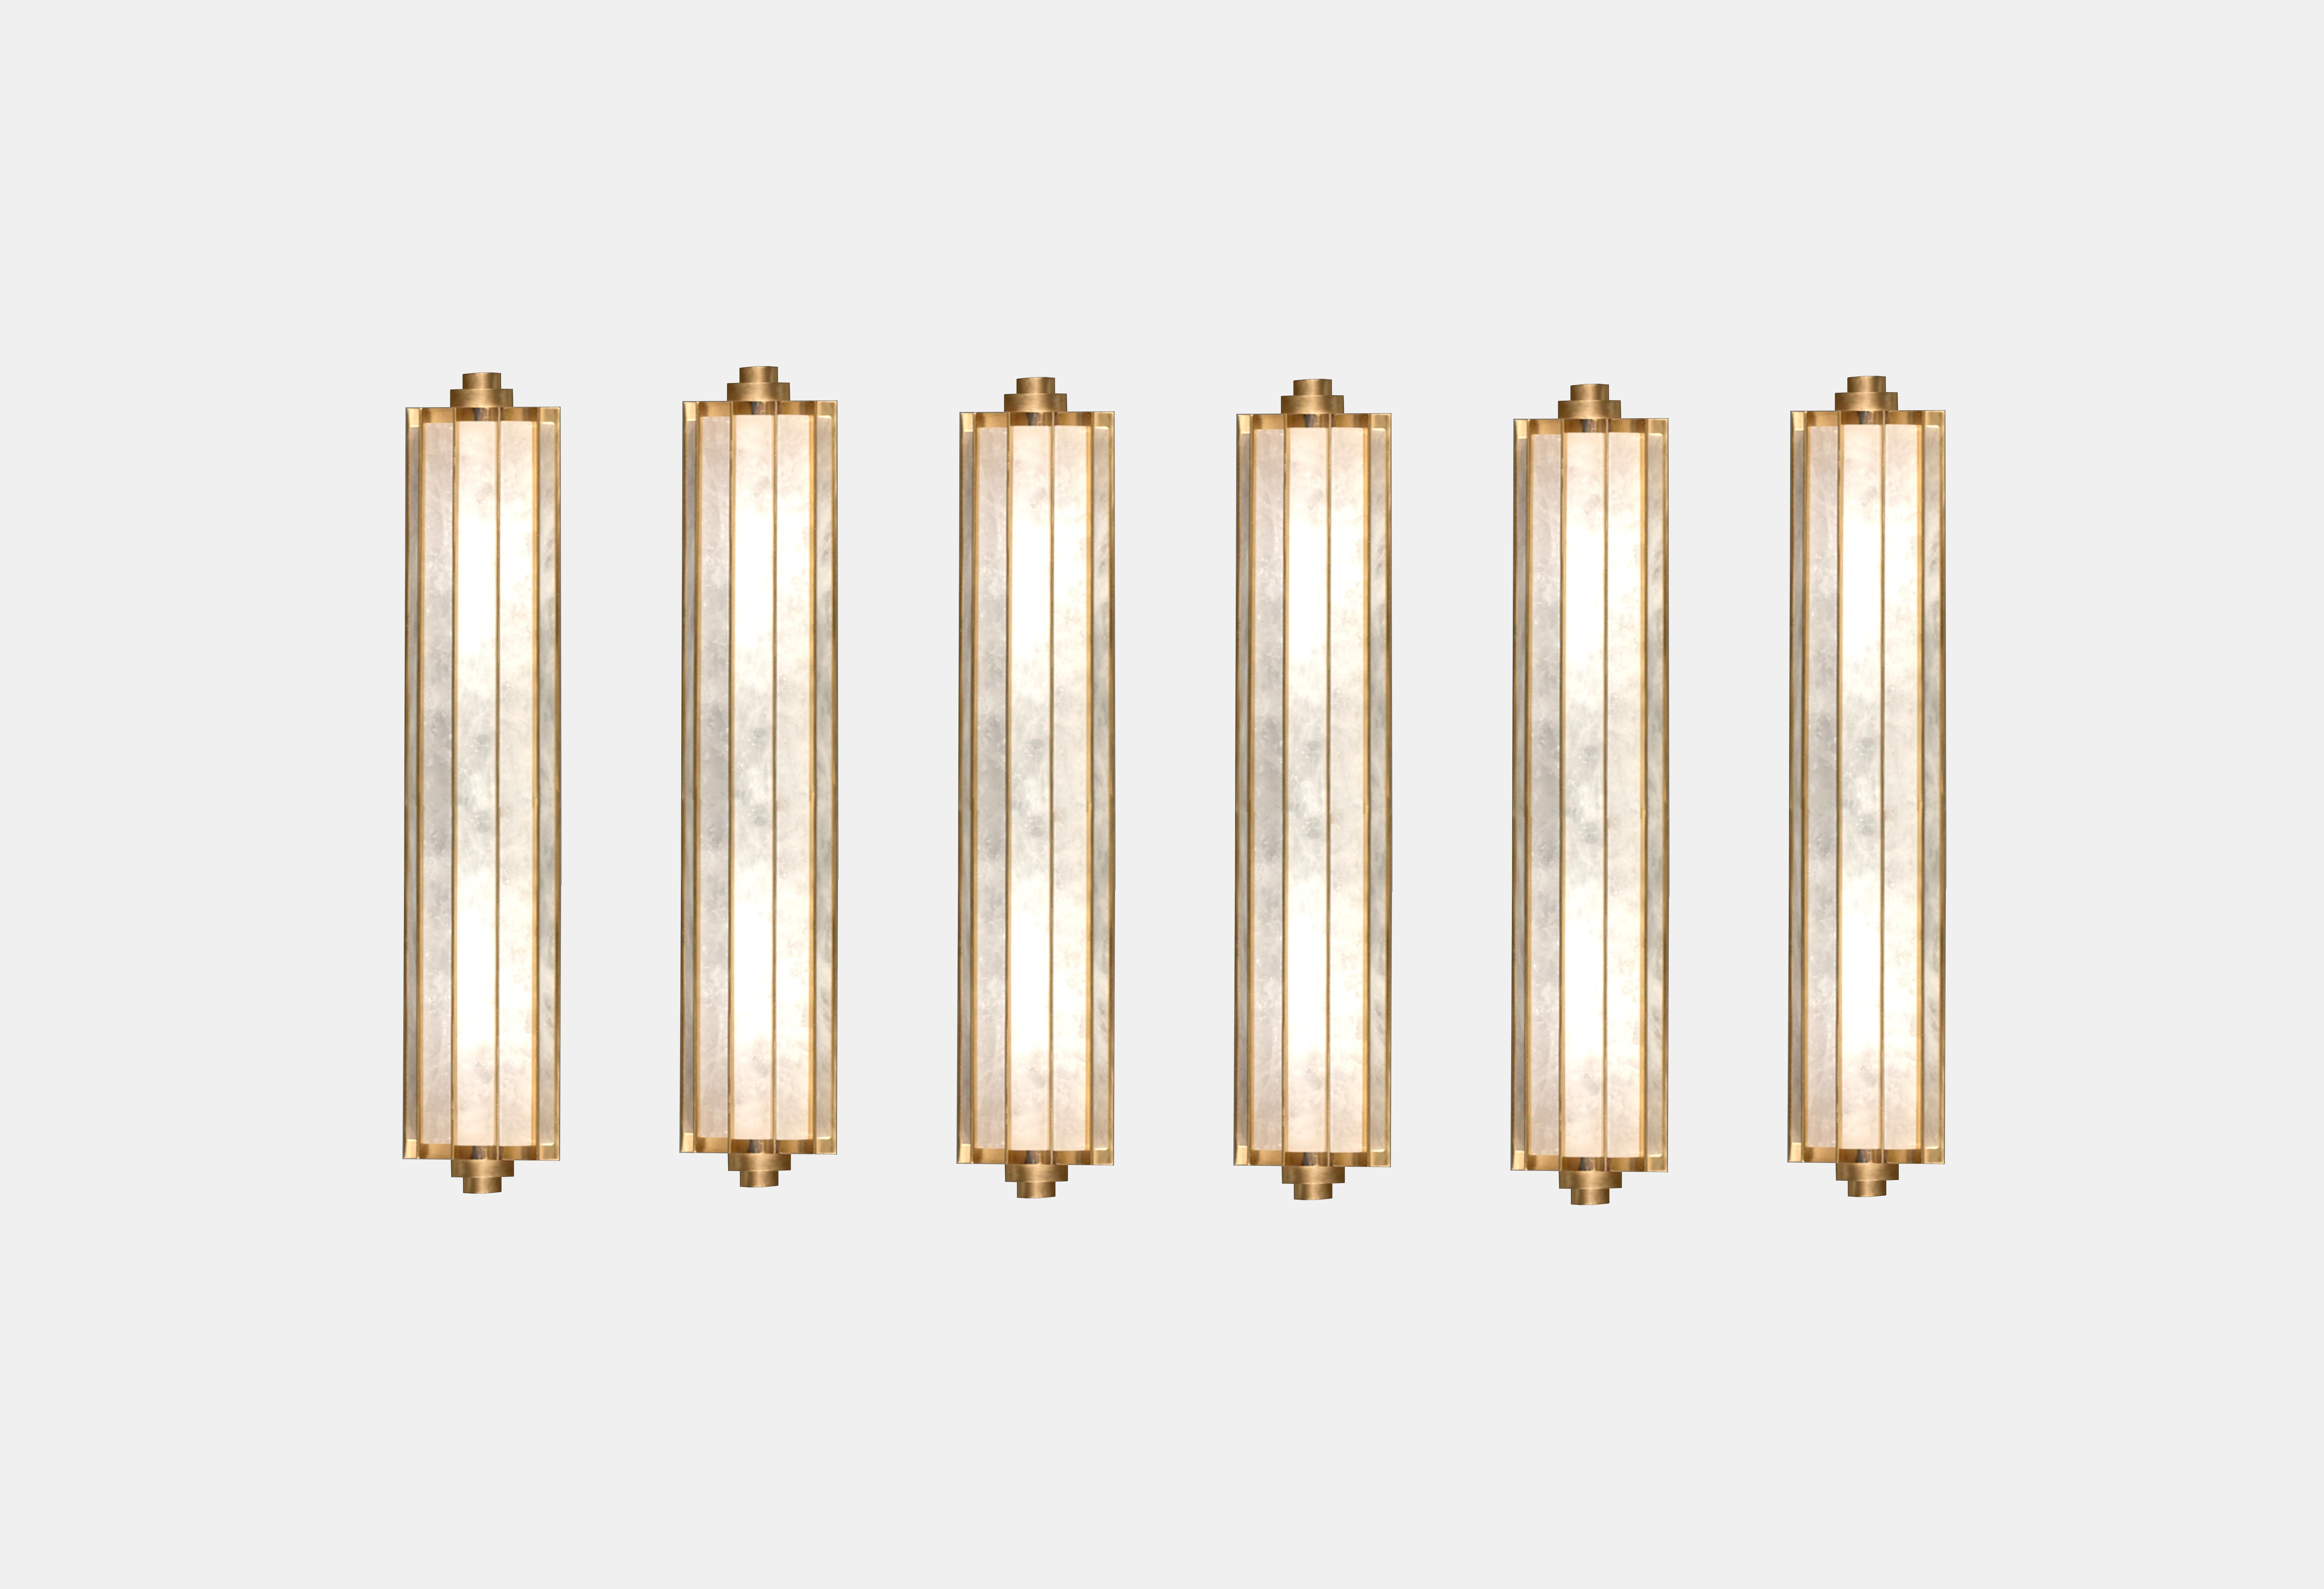 Group of six rock crystal sconces with polish brass decoration.
Created by Phoenix Gallery.
Each sconces installed four sockets.
Use four 60w LED candelabra light bulb.
Metal finish and quantity upon request.
  